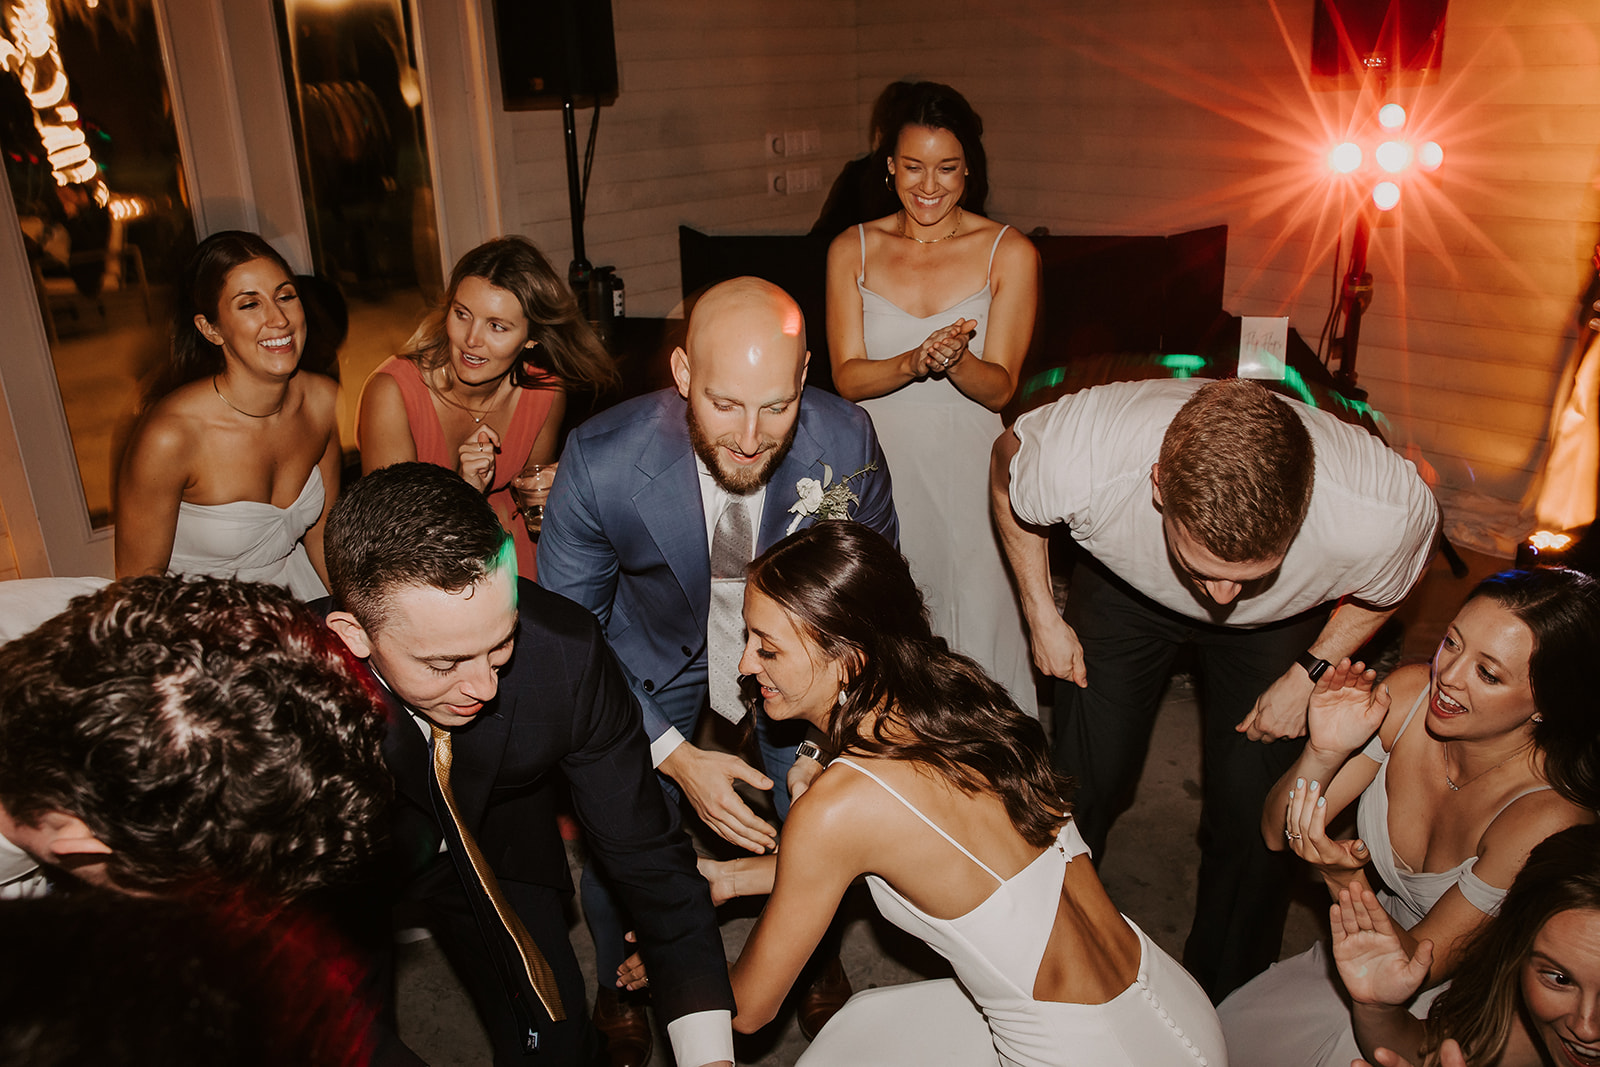 Bride Bailey "gettin low" with her wedding guests